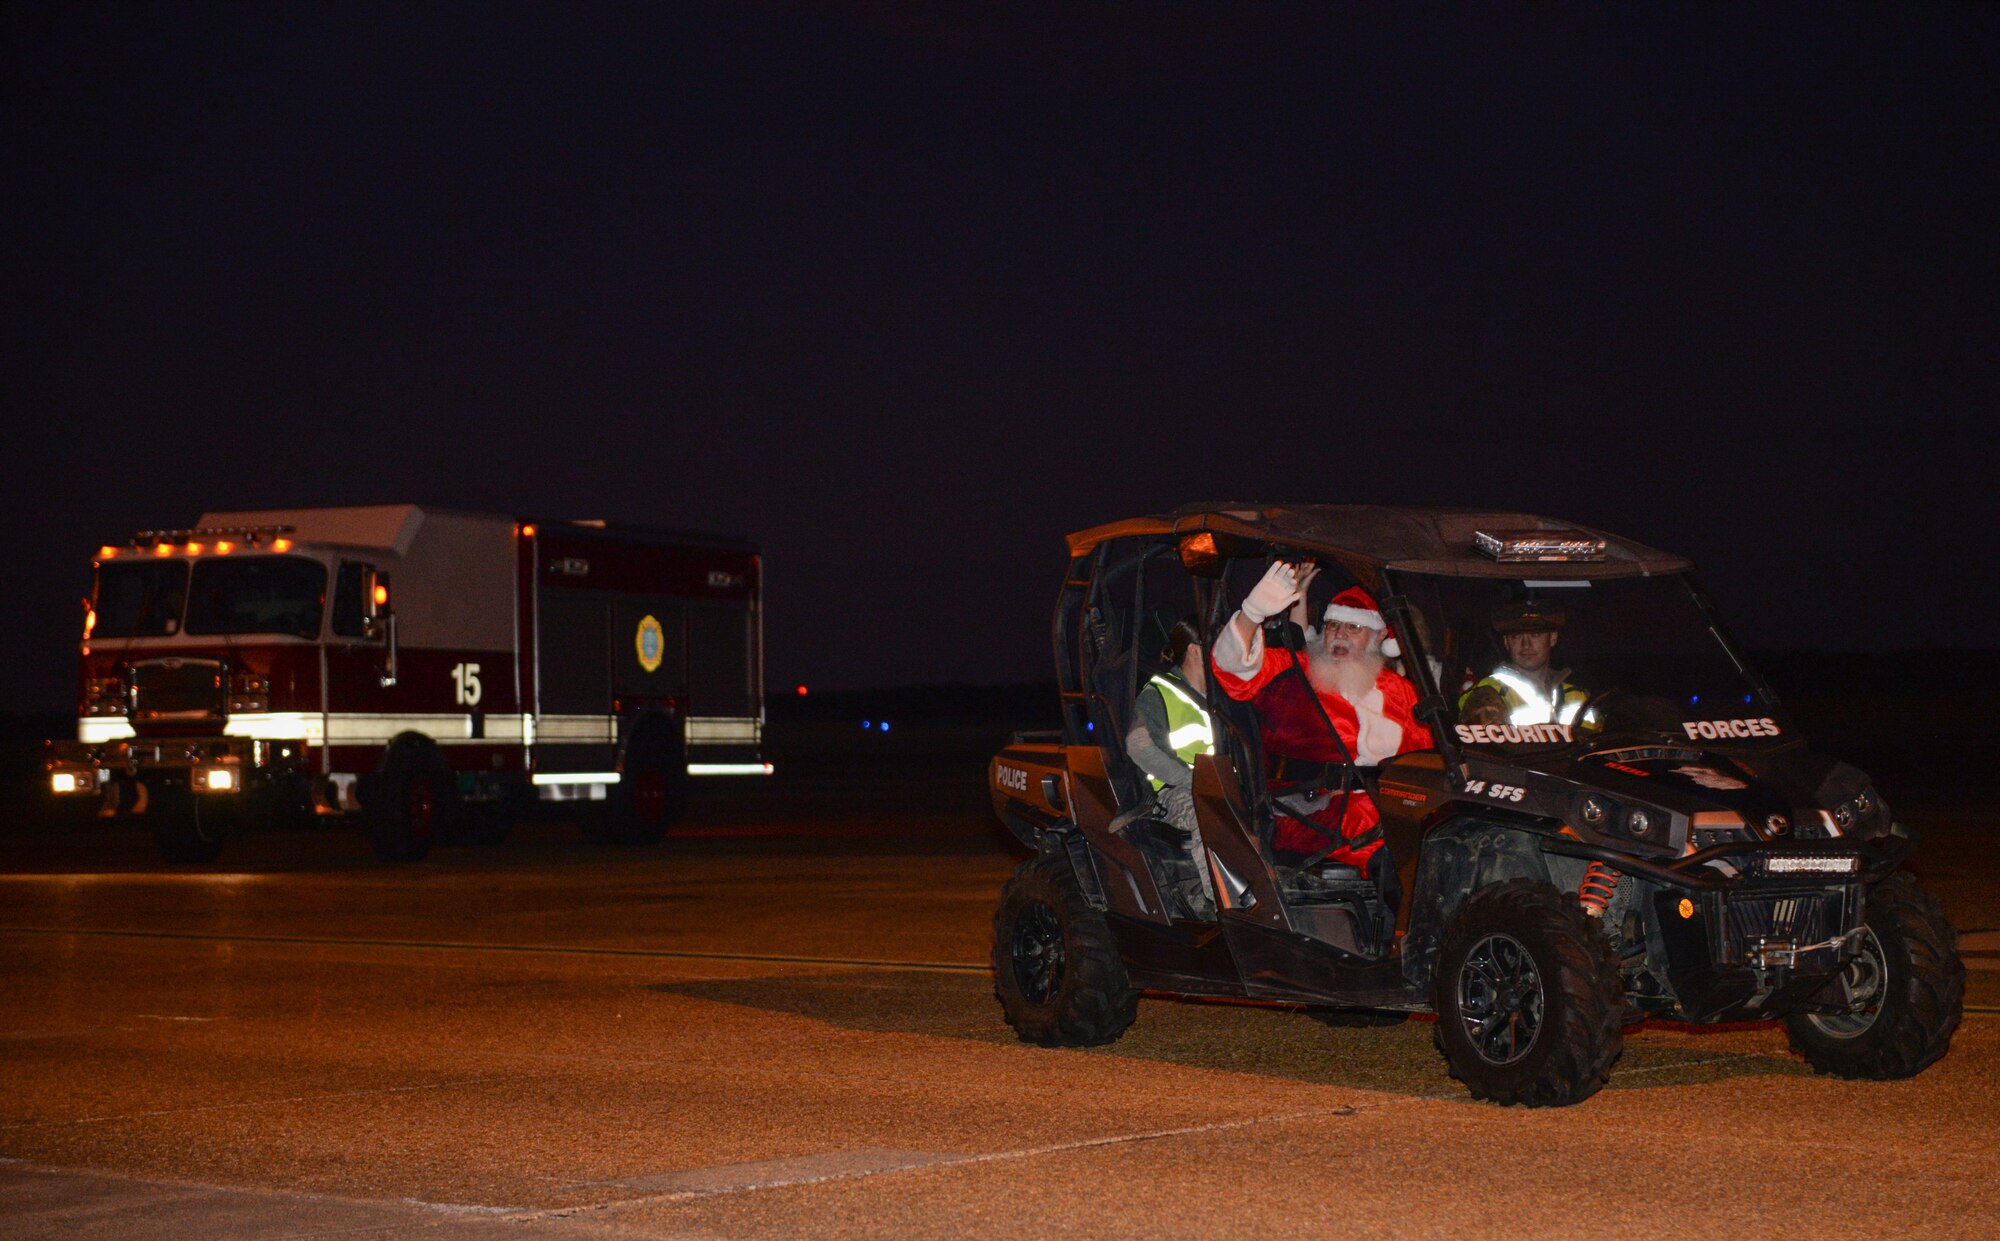 Santa waves to Airmen and their families before leading them on a walking parade Dec. 3, 2019, at Columbus Air Force Base, Miss. Santa Claus and Mrs. Claus arrived at the Columbus AFB flight line by riding in a T-1 Jayhawk. (U.S. Air Force photo by Airman Davis Donaldson)